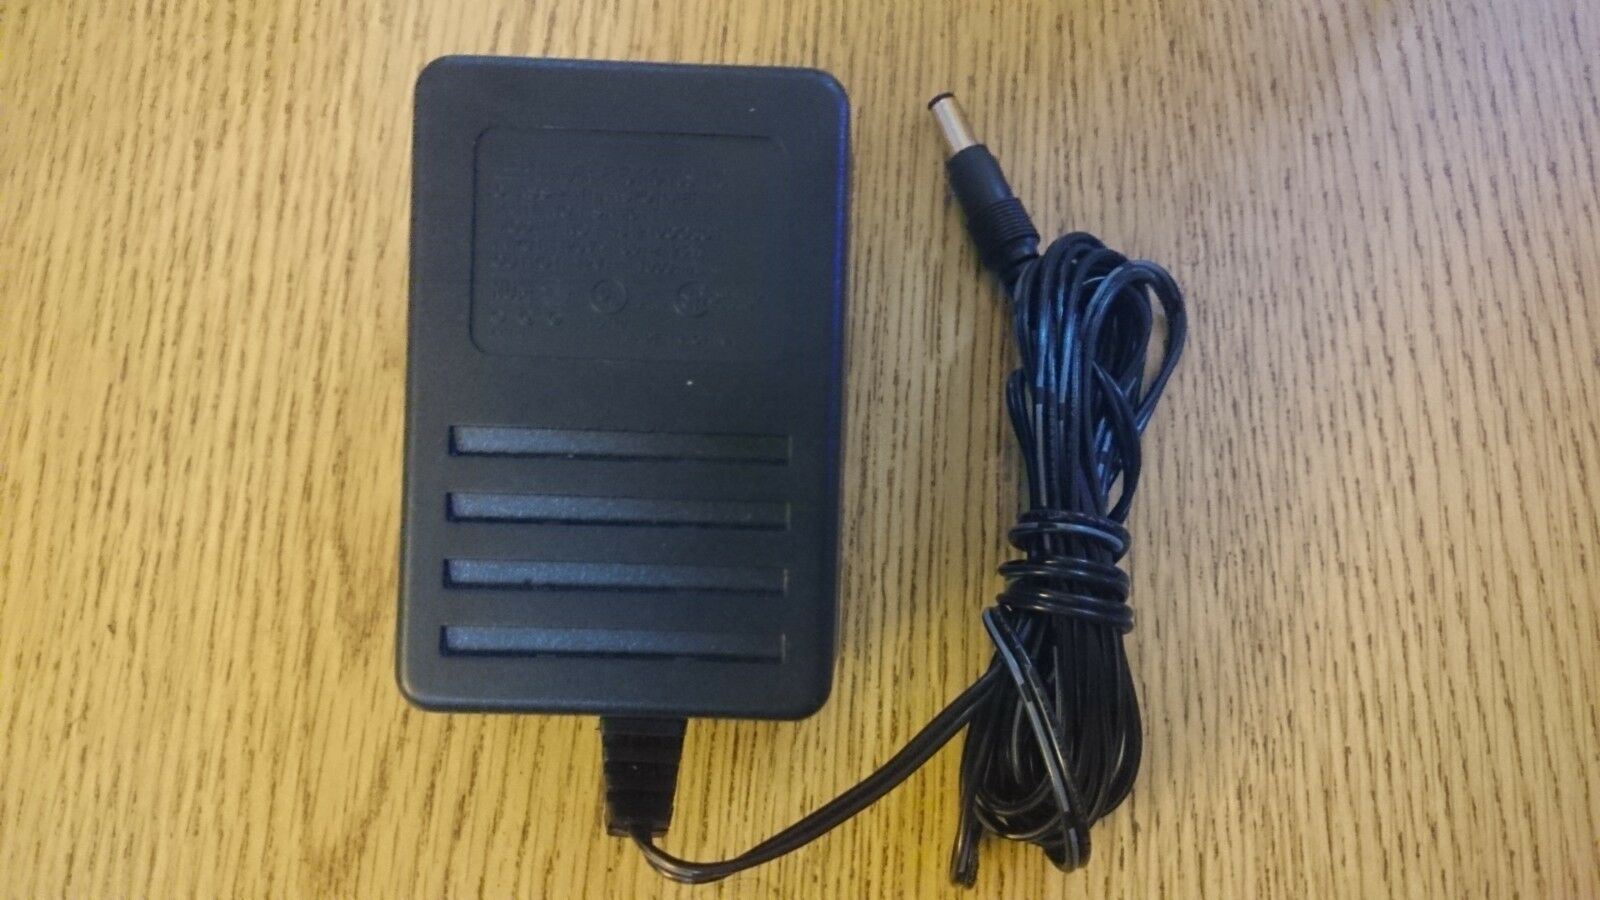 New 12V 1000mA LEI 481210OO3CT AC Power Supply Charger Adapter - Click Image to Close